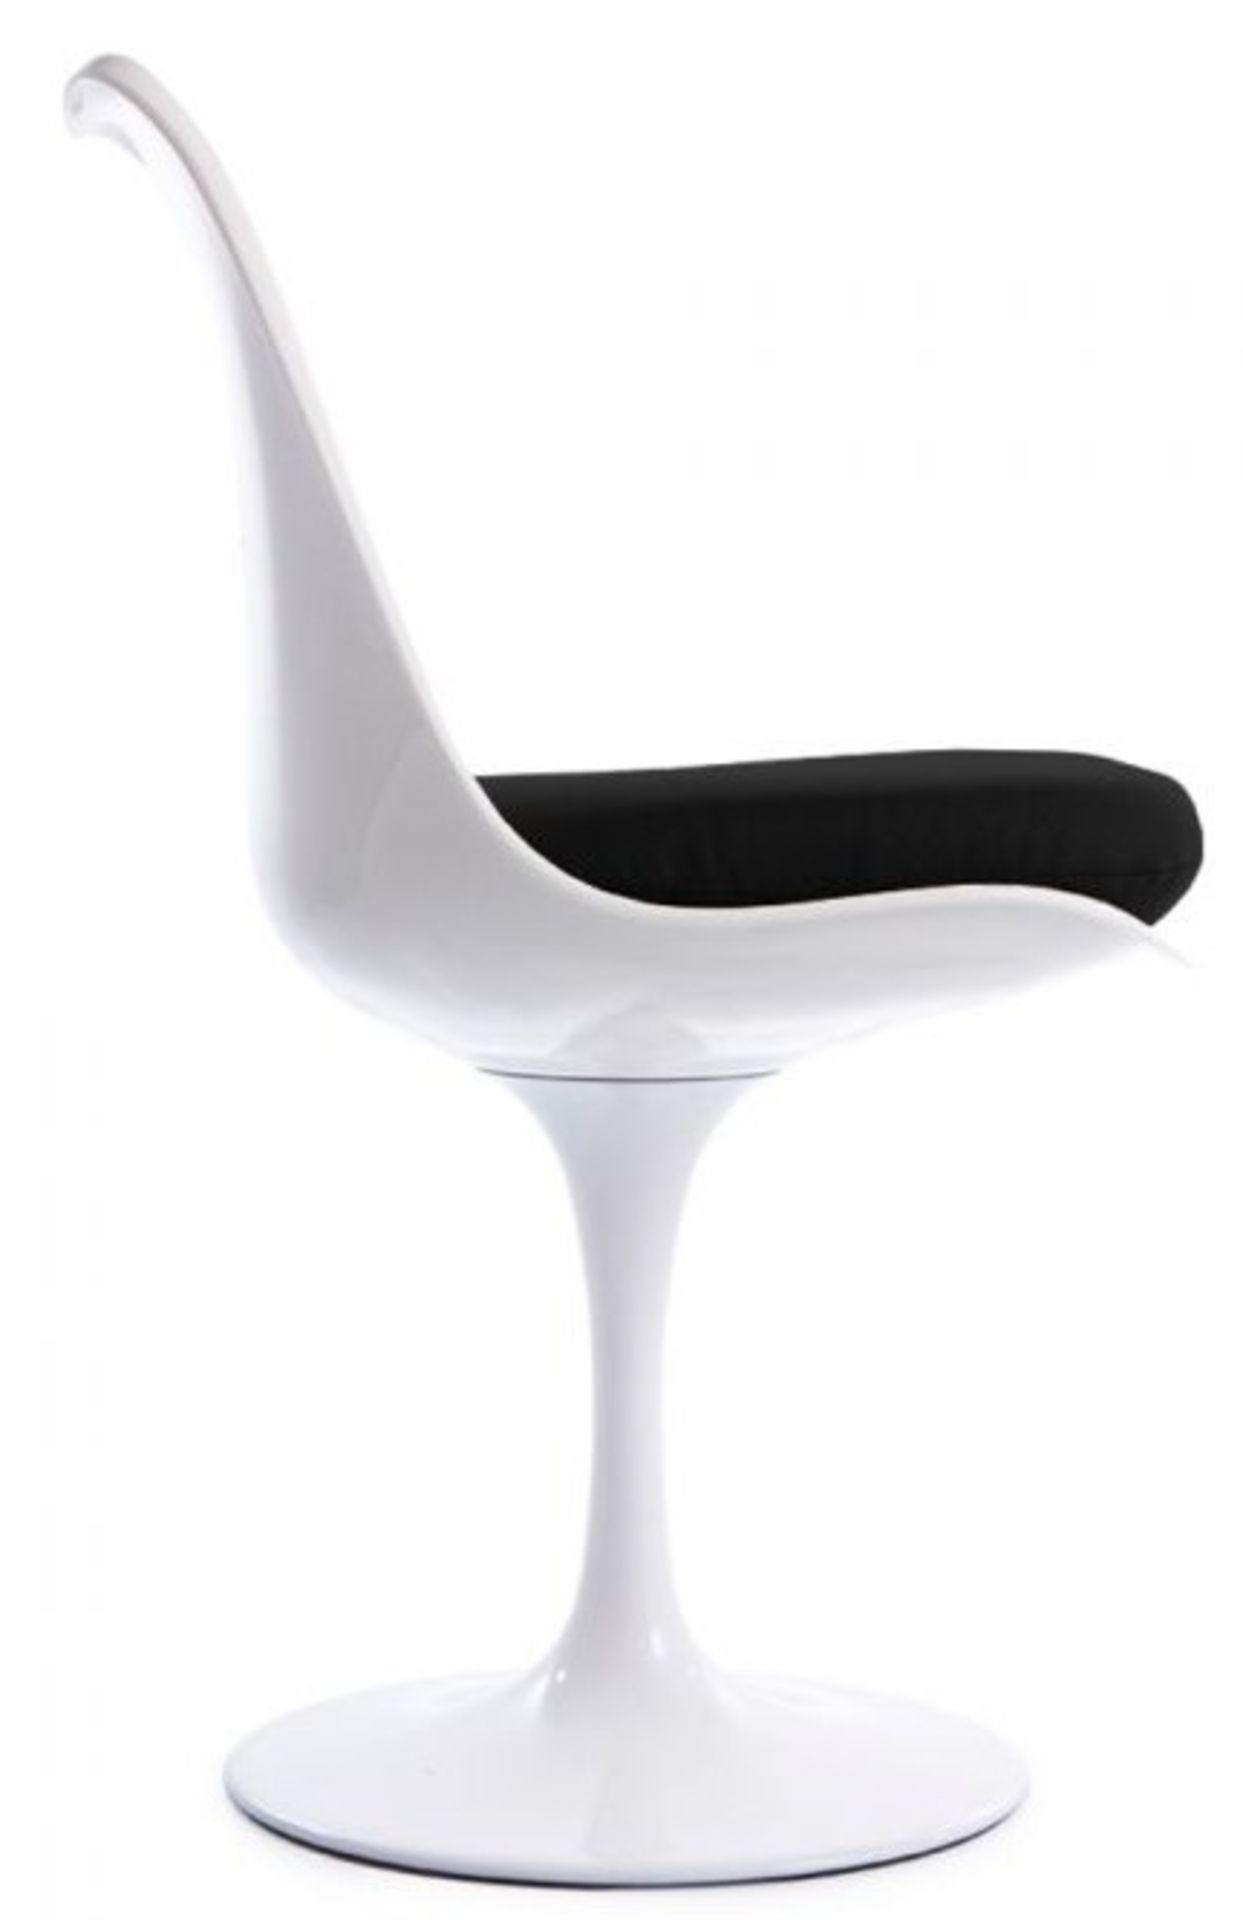 1 x Eero Saarinen Inspired Tulip Armchair In White With Black Faux Leather Cushion - Brand New Boxed - Image 4 of 4